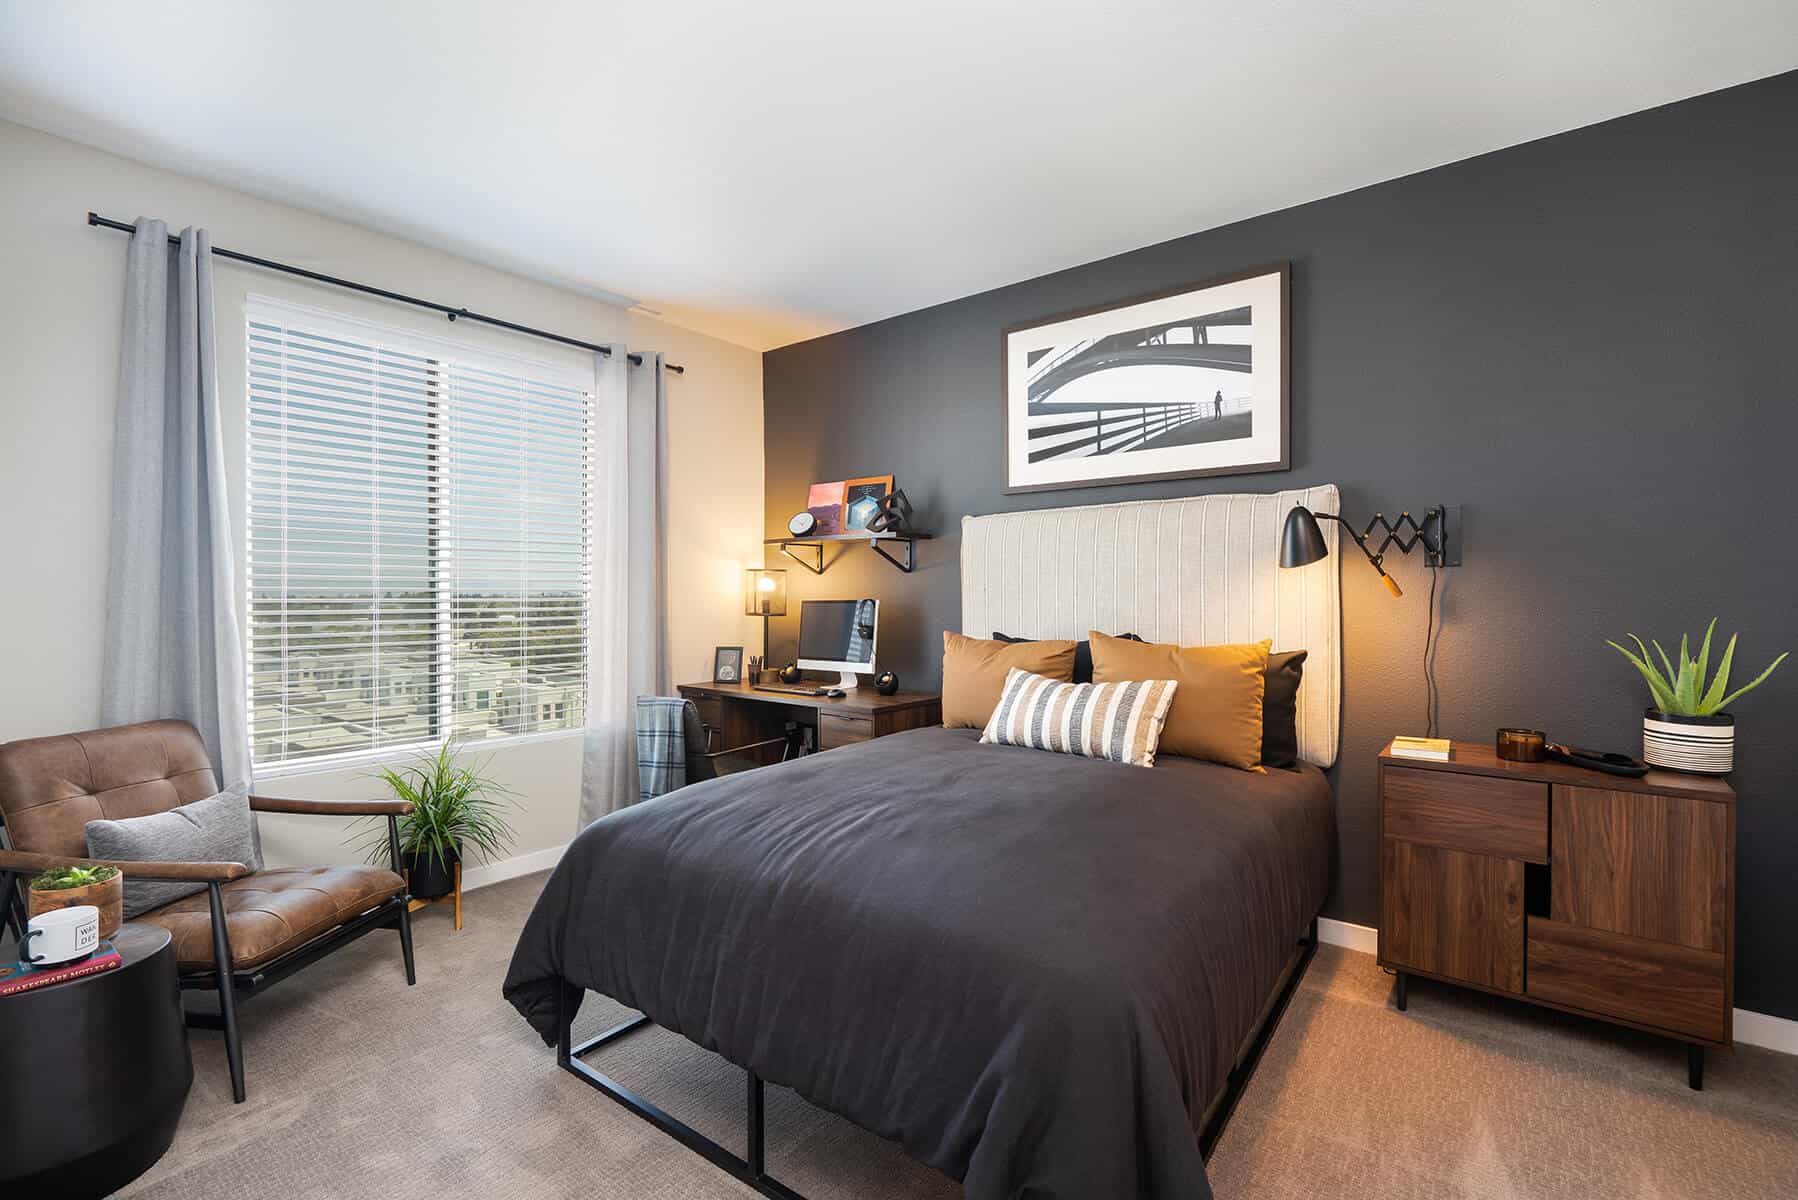 Two Bedroom Apartments in Santa Clara, CA - Prado-Sares-Regis - Spacious Bedroom with Plush Carpeting and a Large Bedside Window